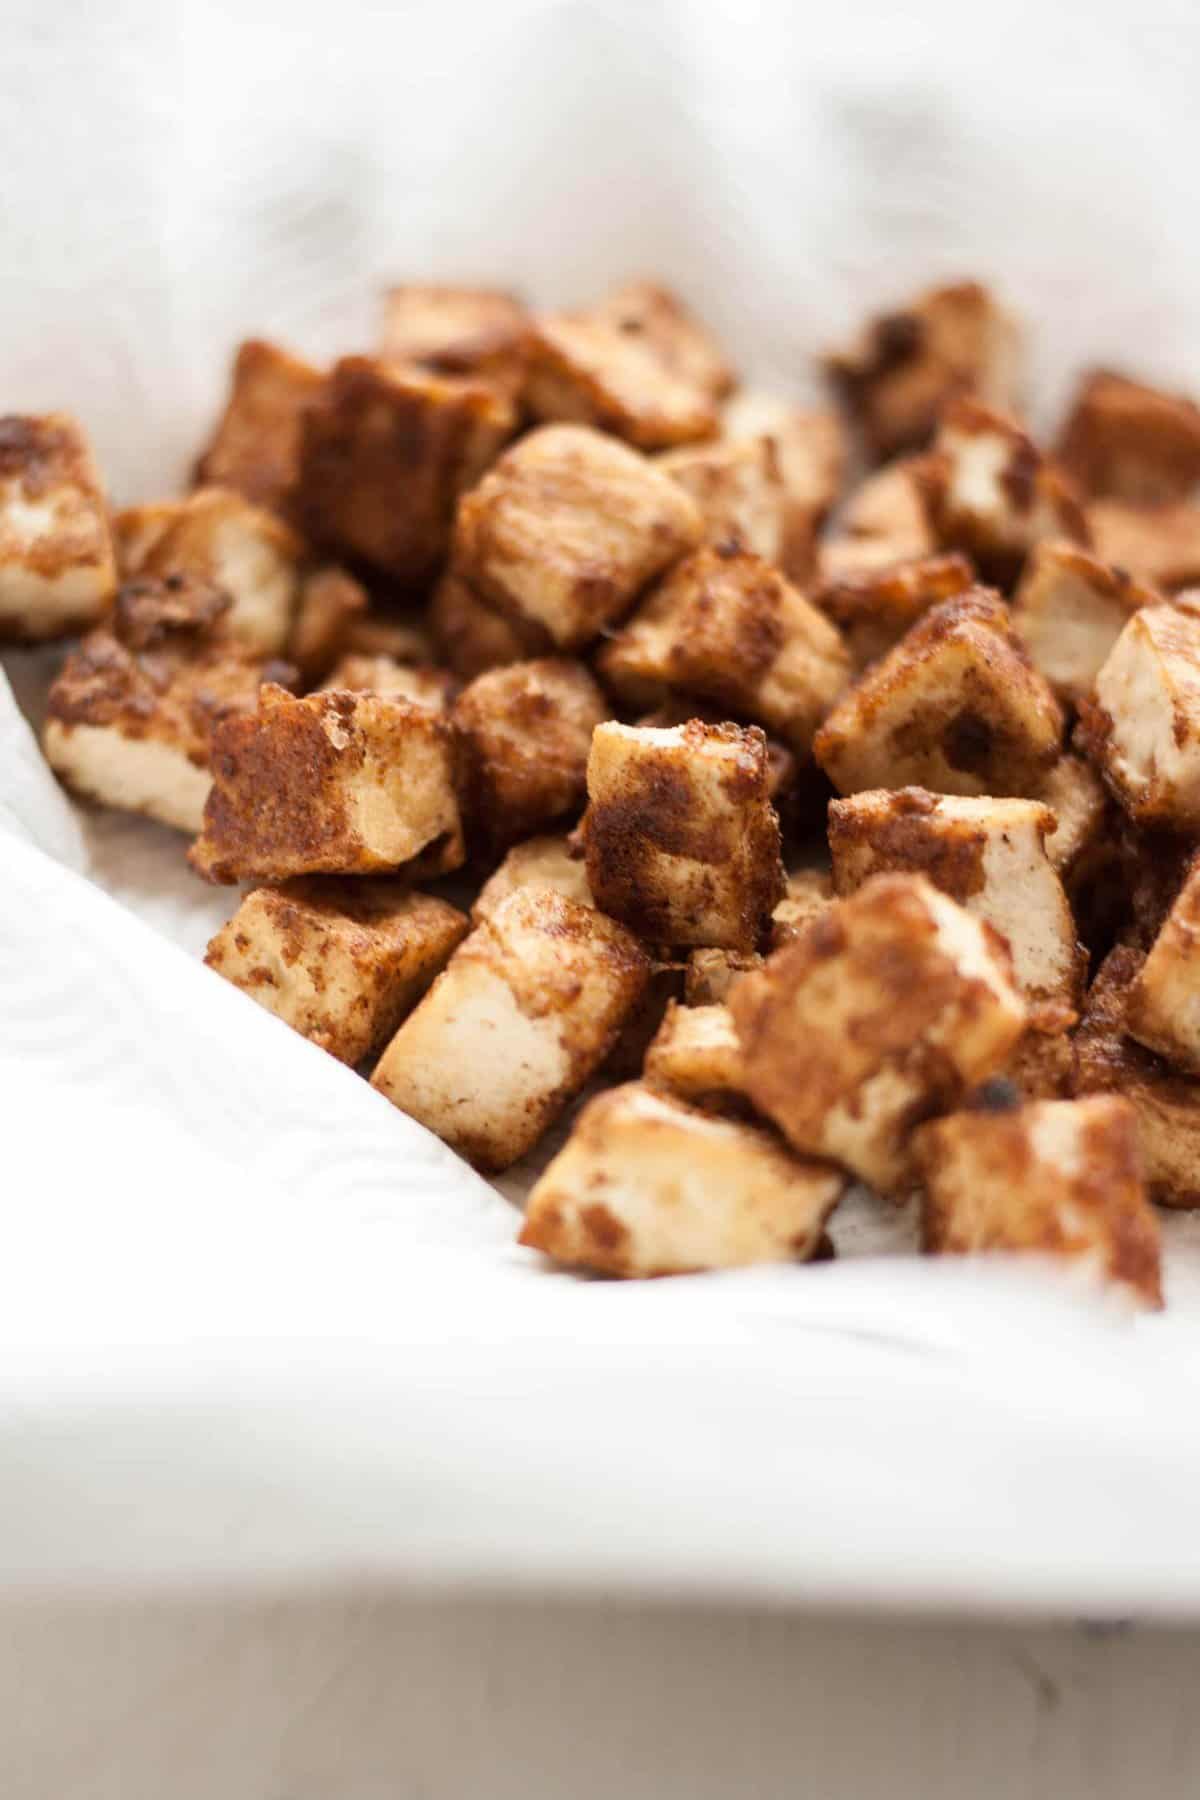 An array of crispy tofu draining on kitchen paper.